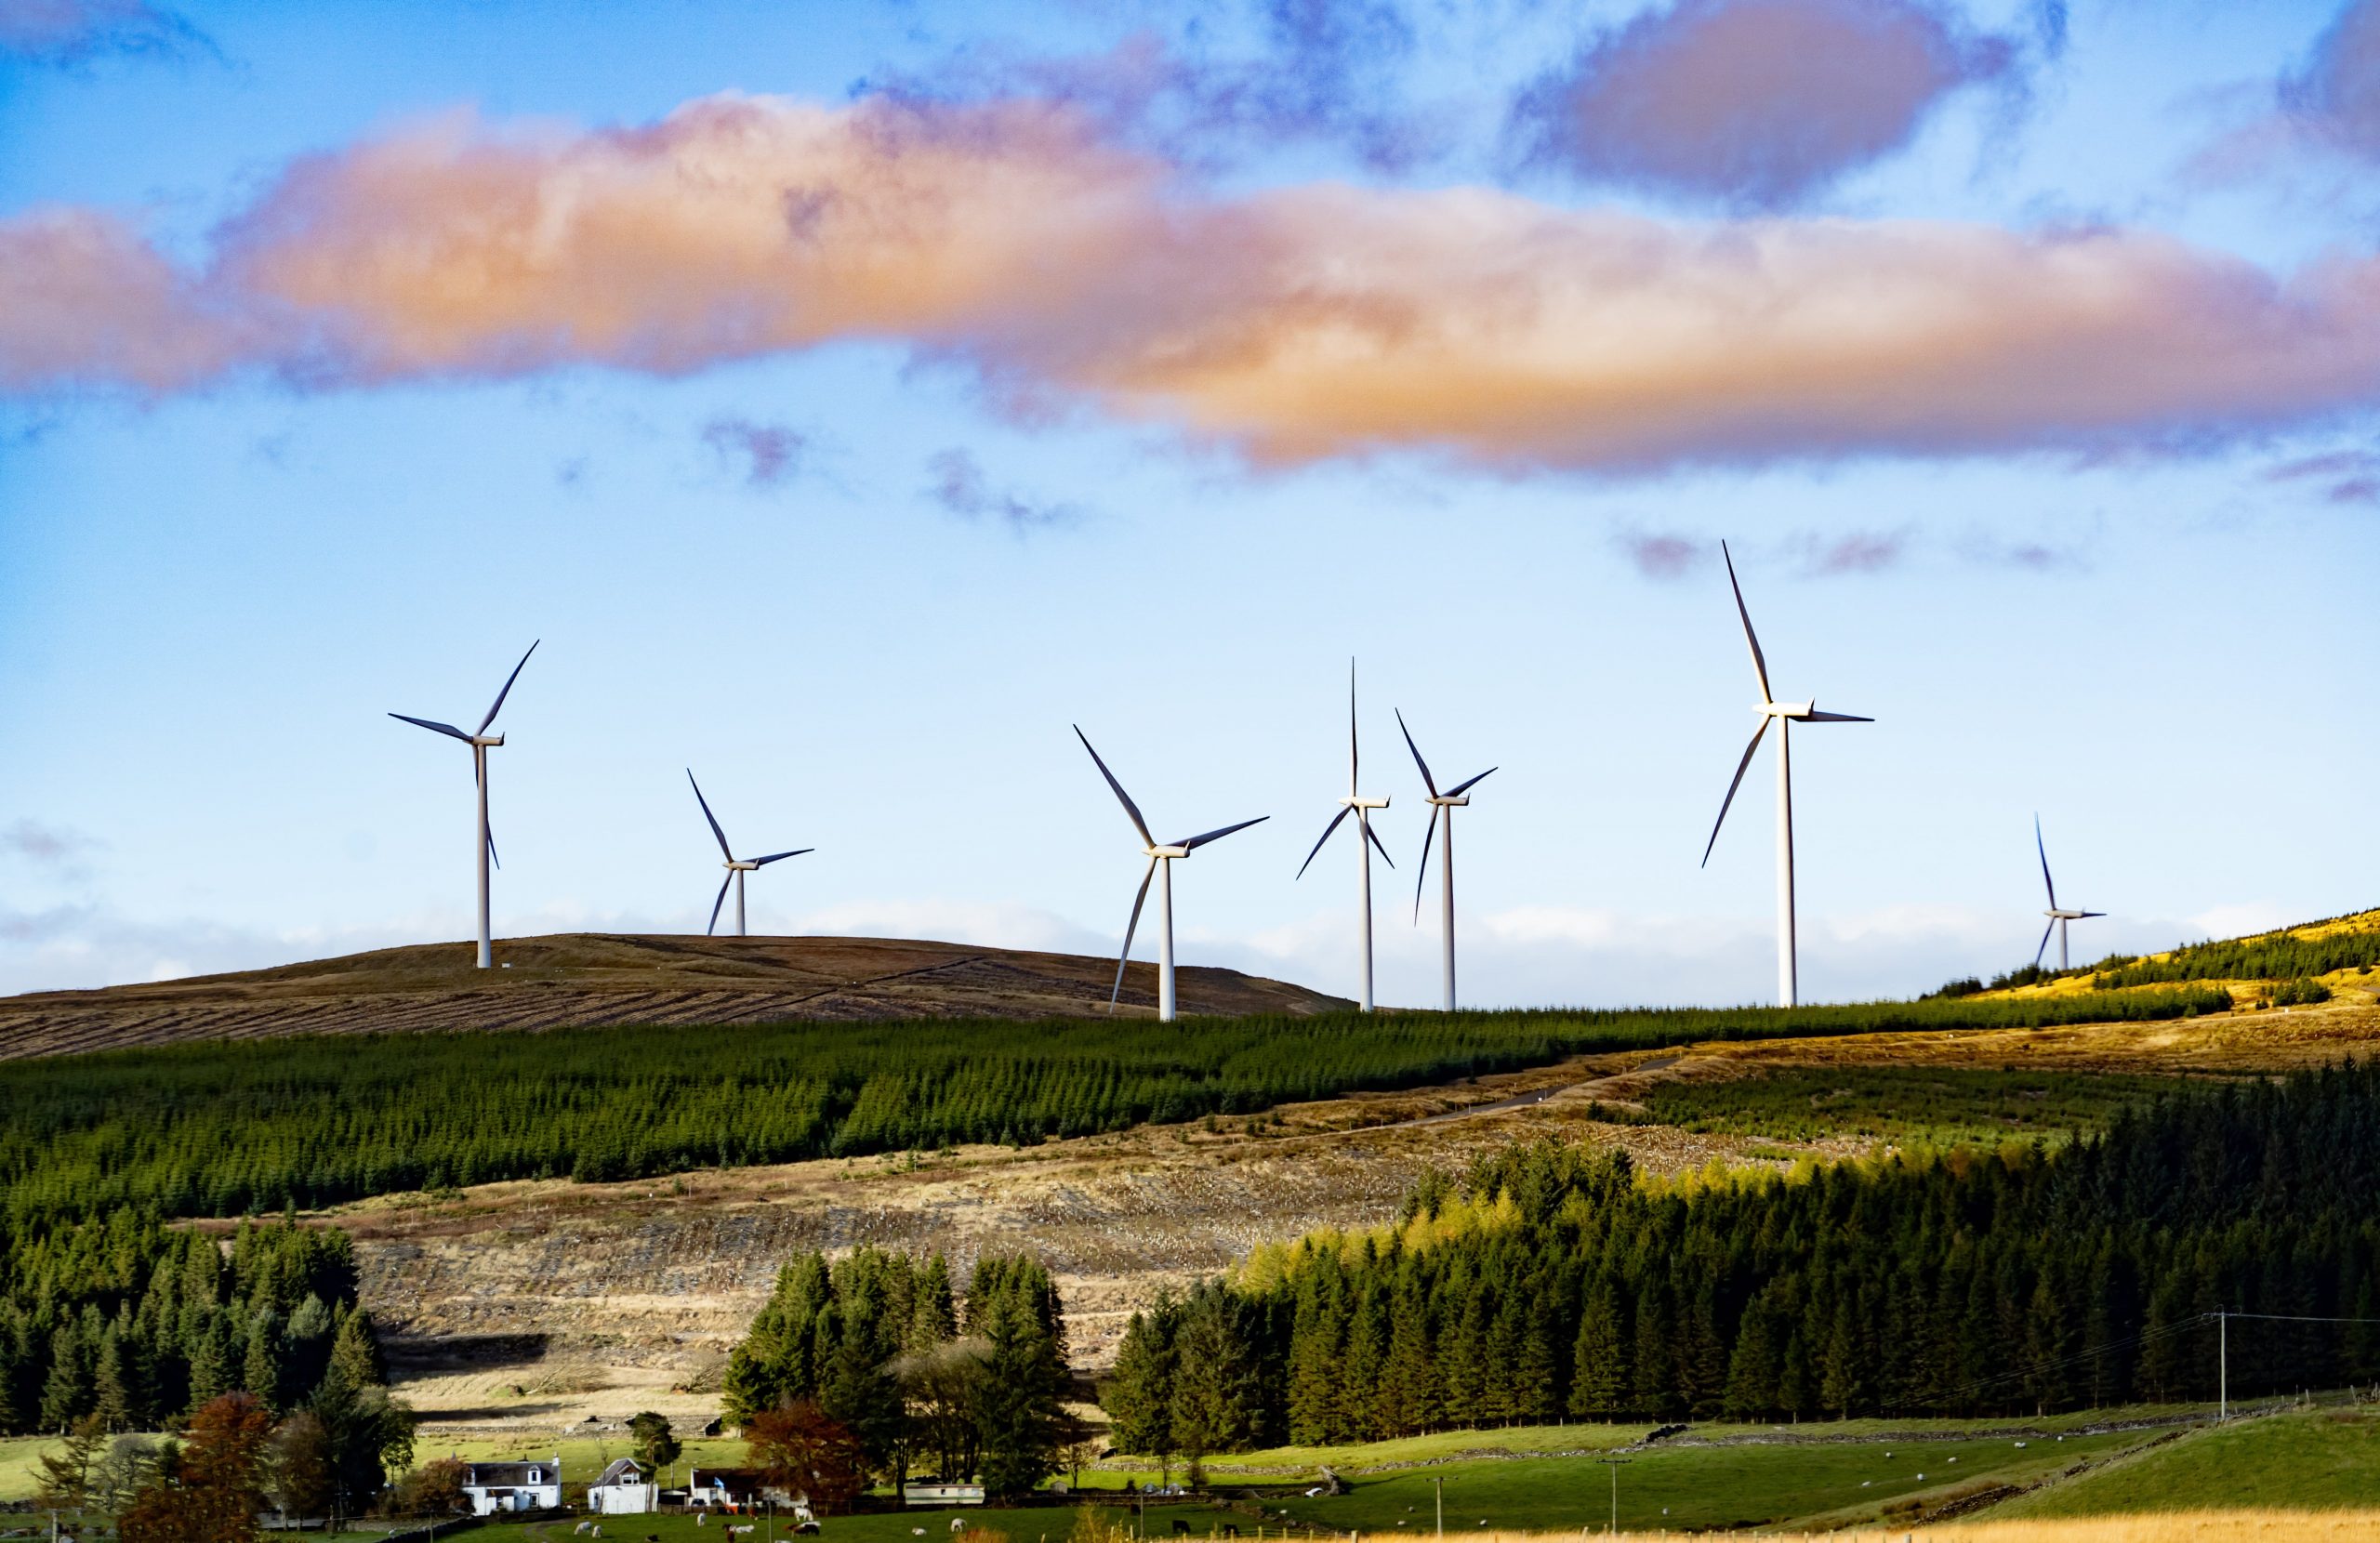 ShowEquip covers the Renewable Energy sector / industry. Image of large wind turbines surrounded by trees and fields.